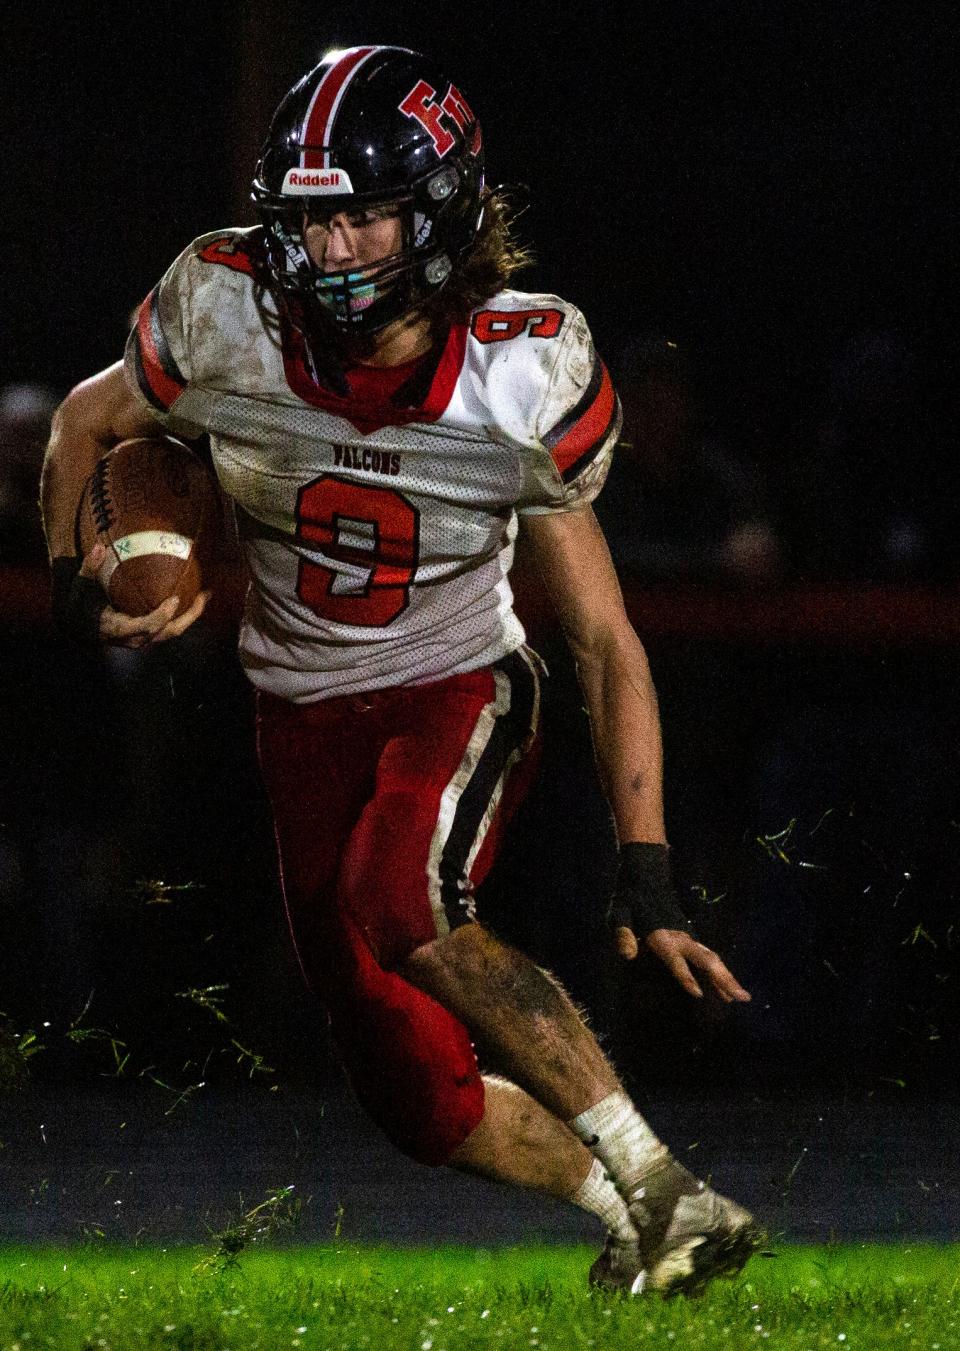 Fairfield Union's Hayden Collins (9) looks for a hole in the Amanda-Clearcreek defense as Amanda-Clearcreek hosted Fairfield Union in boys football action at Amanda-Clearcreek High School in Amanda, Ohio on October 22, 2021.